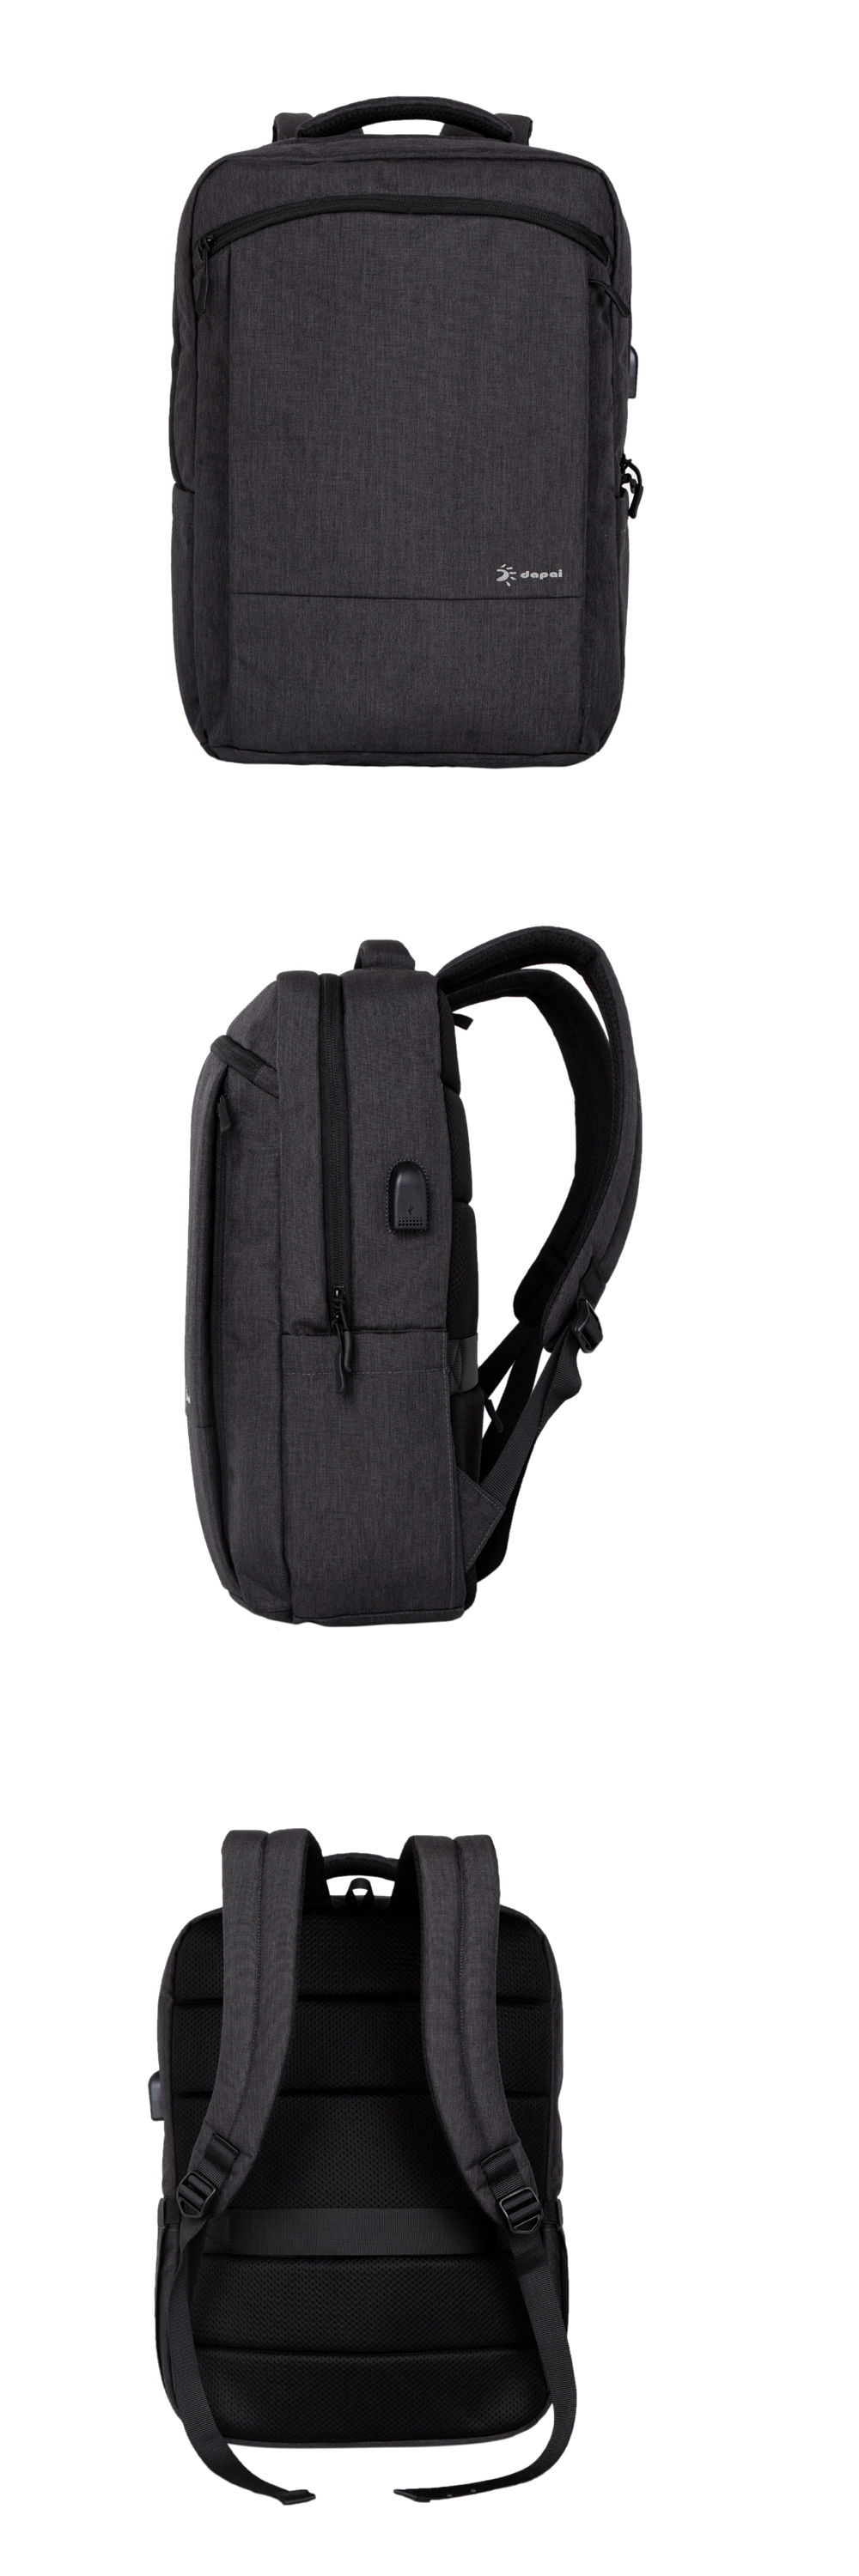 Travel Backpack Business Anti Theft Durable Laptops Backpack with USB Charging Port College School Computer Bag